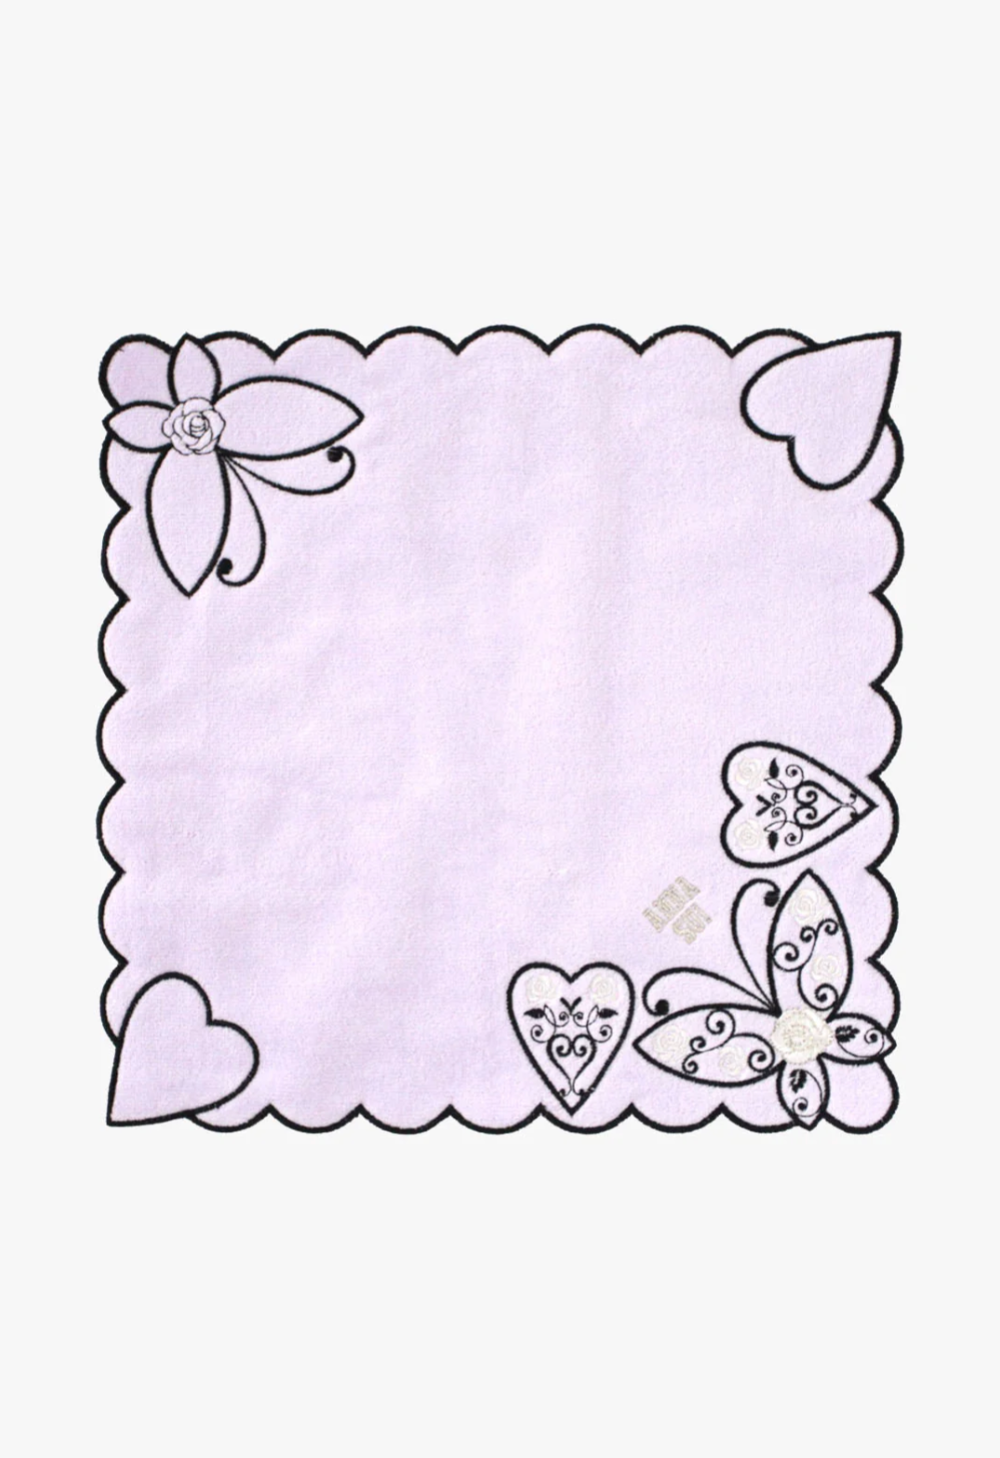 Butterfly Hearts Washcloth